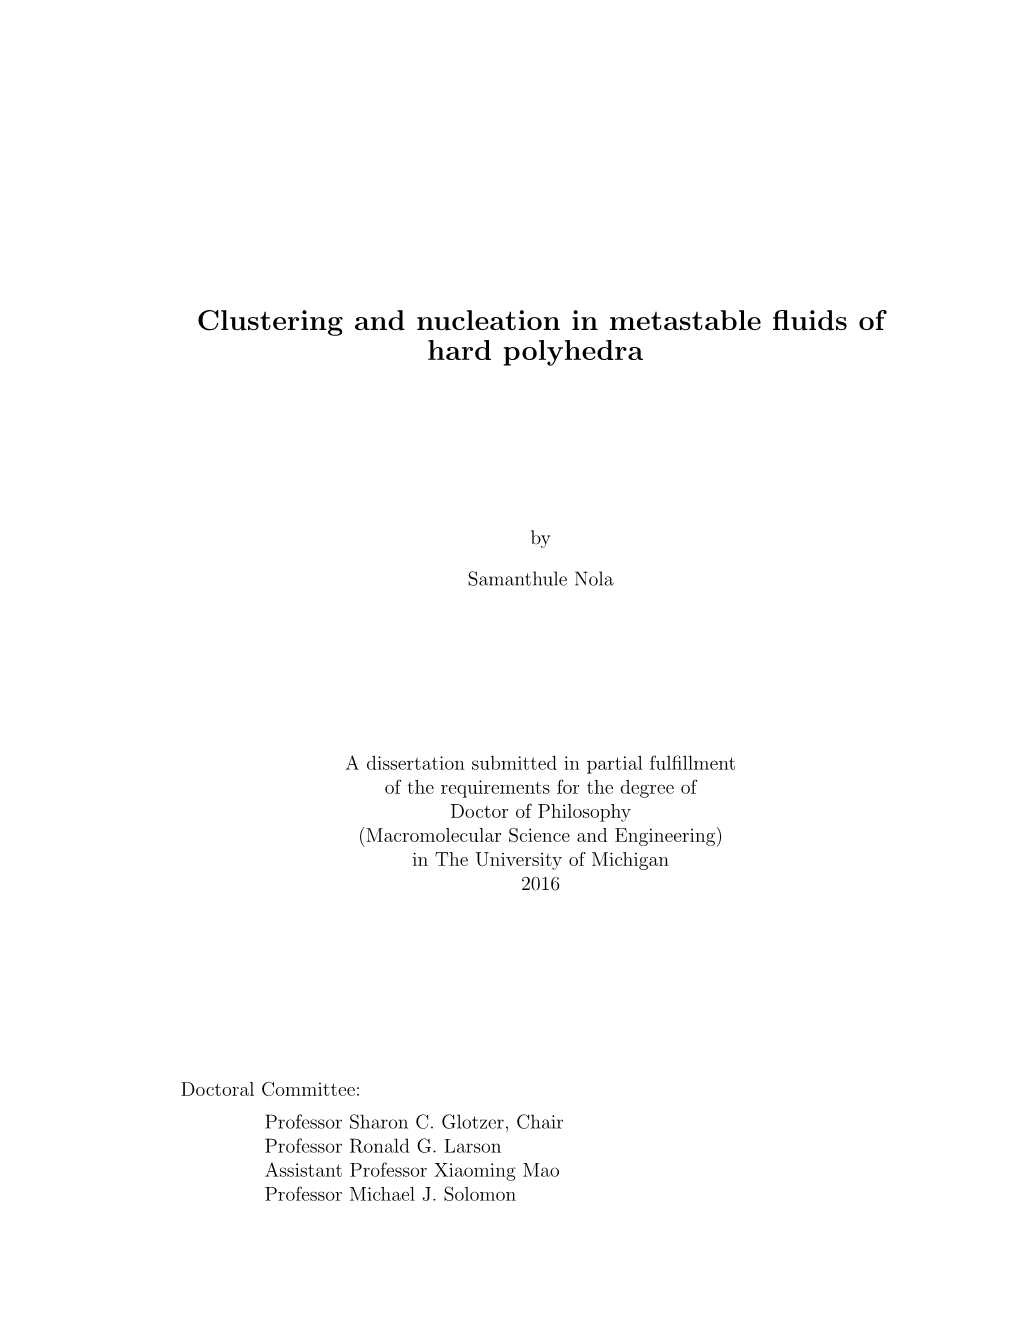 Clustering and Nucleation in Metastable Fluids of Hard Polyhedra